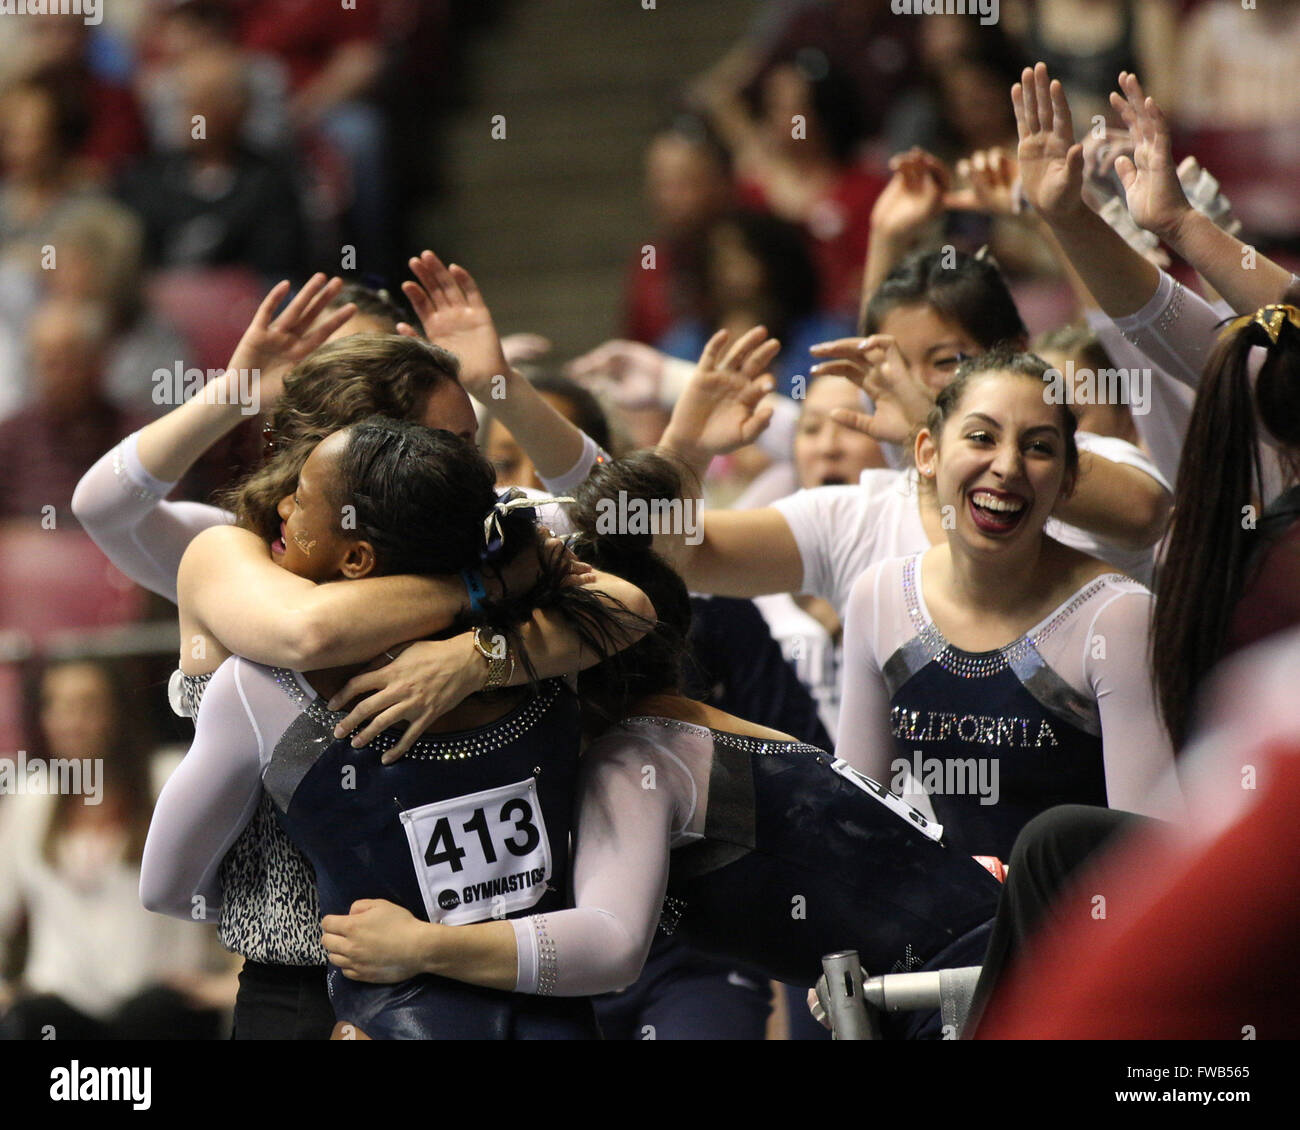 April 2, 2016: The University of California Berkeley gymnastics team celebrates at the NCAA Tuscaloosa Regional gymnastics championship. California pulled out the win, scoring a 195.925 to take second place behind the University of Alabama. The second place finish means California earned a berth at the NCAA Gymnastics Championships in Fort Worth, Texas for the first time since 1992. Melissa J. Perenson/CSM Stock Photo